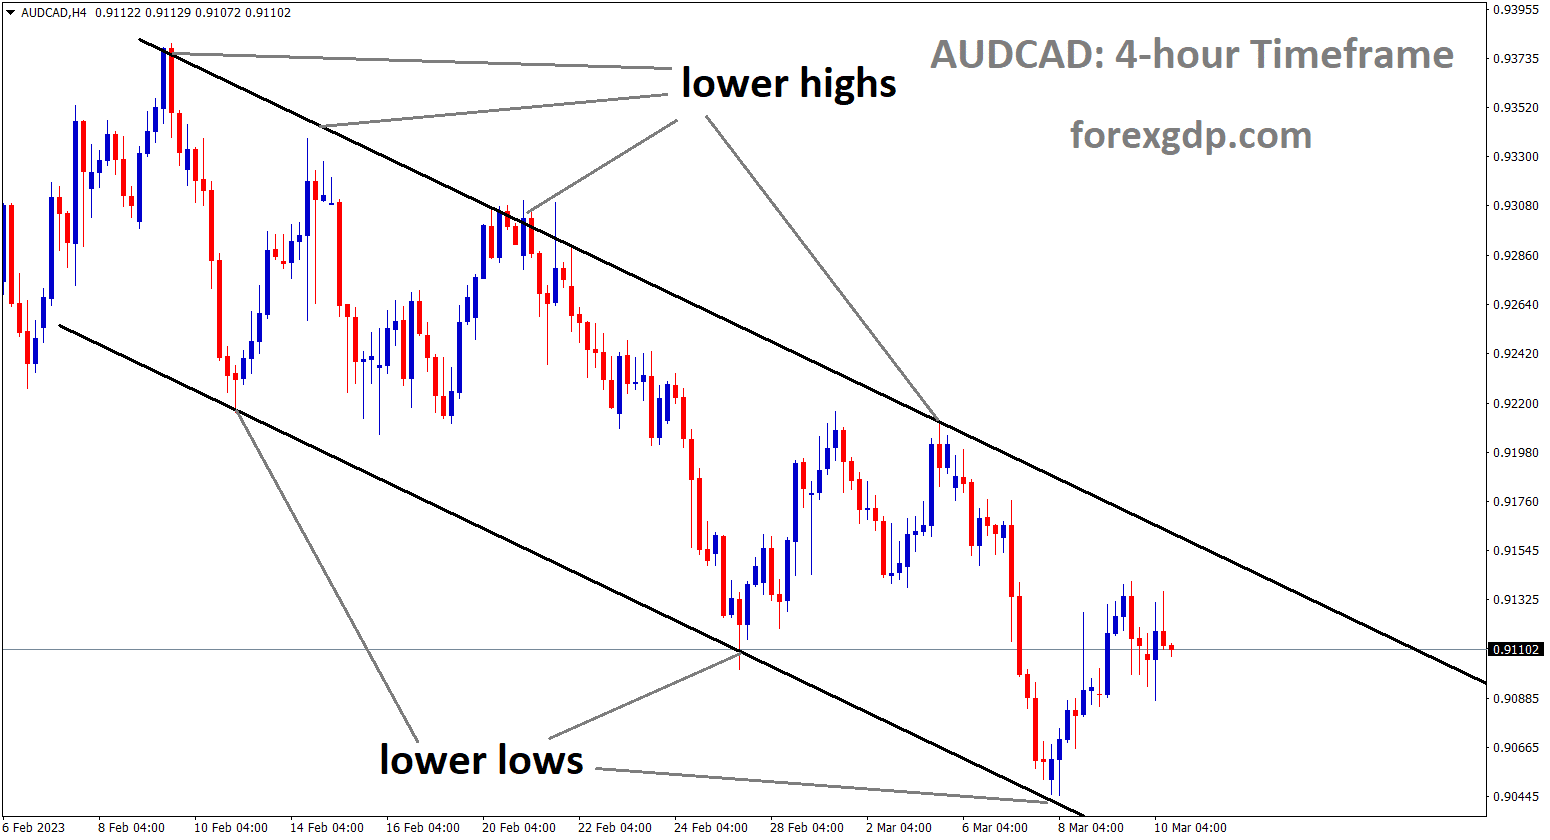 AUDCAD is moving in Descending channel and the market has rebounded from the lower low area of the channel.